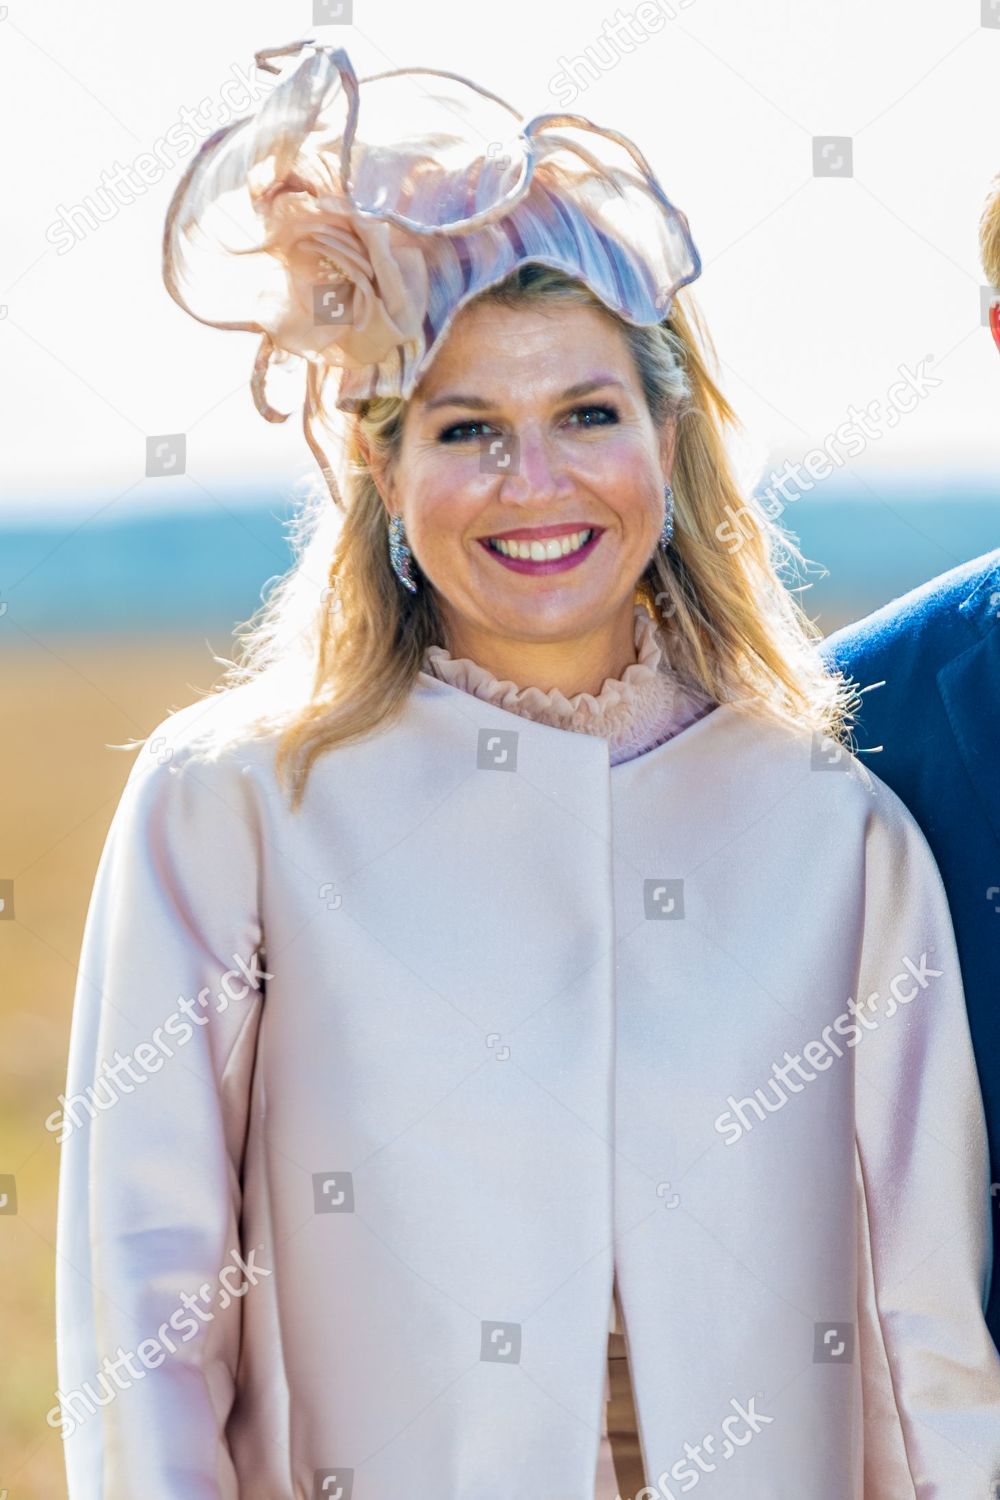 king-willem-alexander-and-queen-maxima-visit-to-south-west-drenthe-netherlands-shutterstock-editorial-10417139ab.jpg